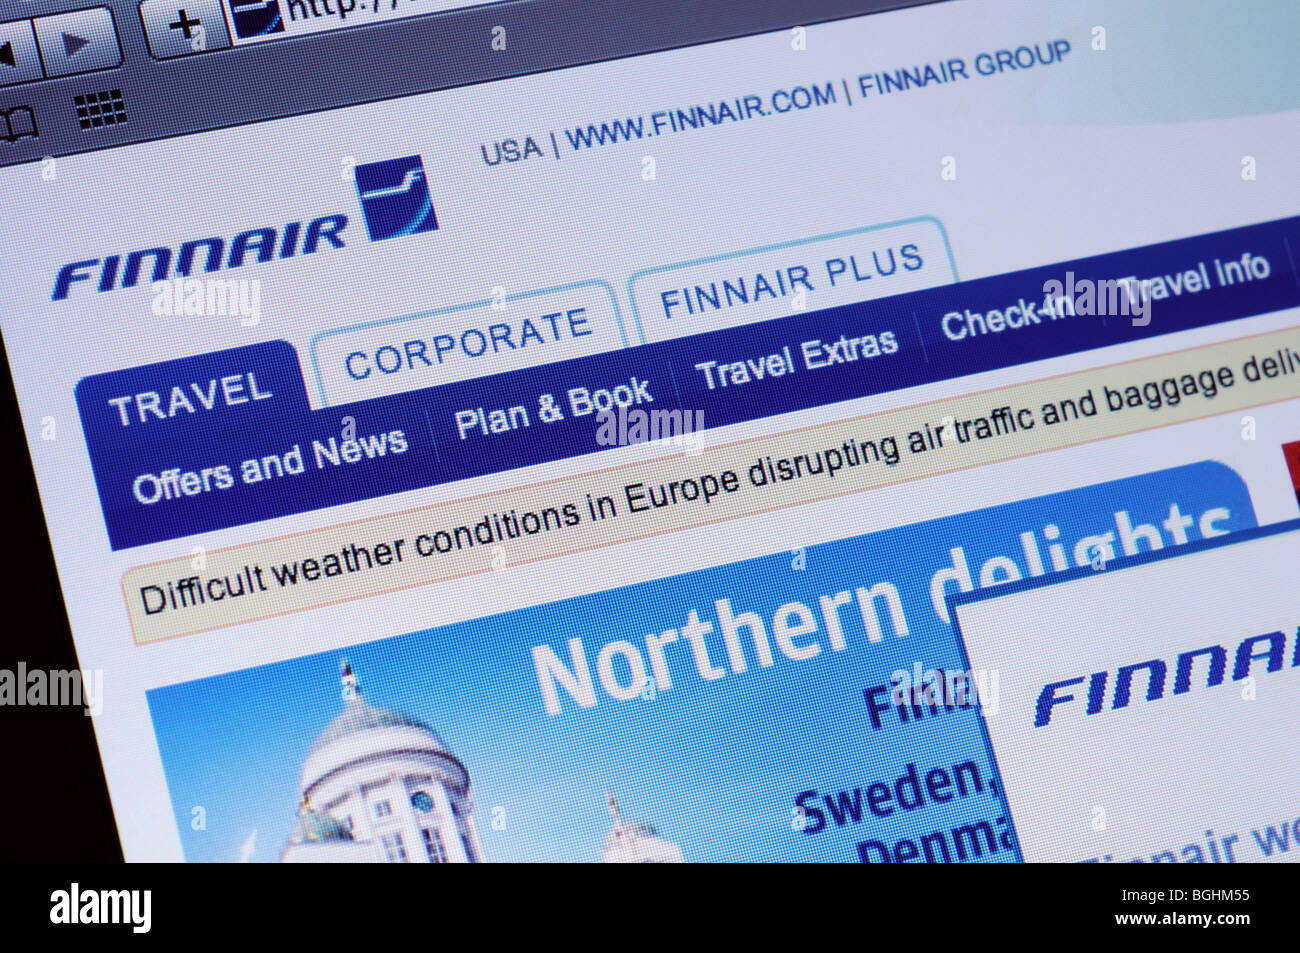 Finnair (Finnish Airlines) site web Banque D'Images